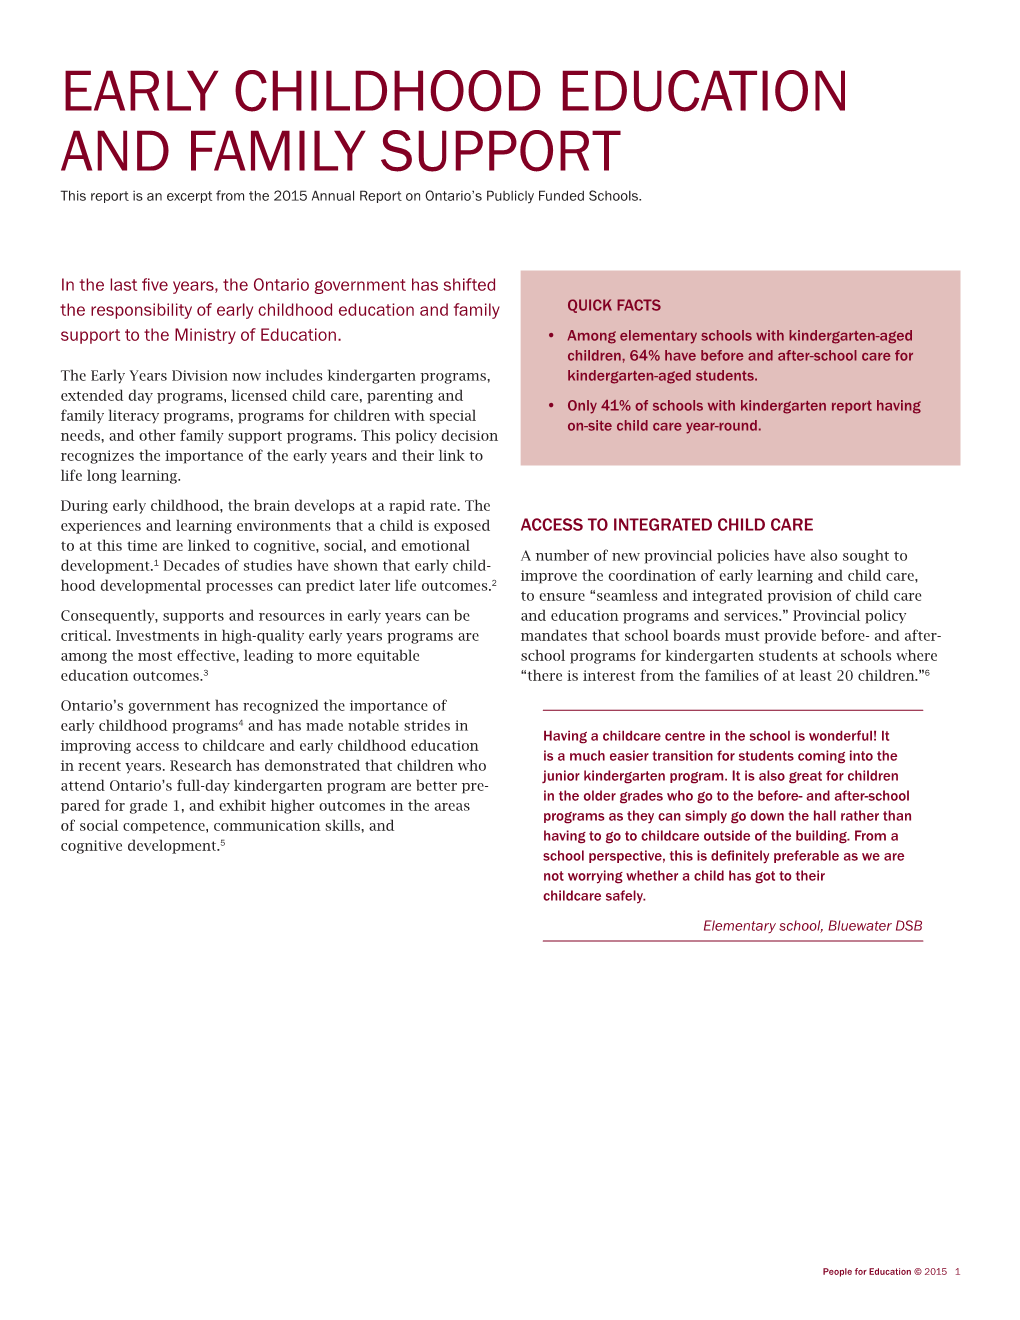 Early Childhood Education and Family Support This Report Is an Excerpt from the 2015 Annual Report on Ontario’S Publicly Funded Schools